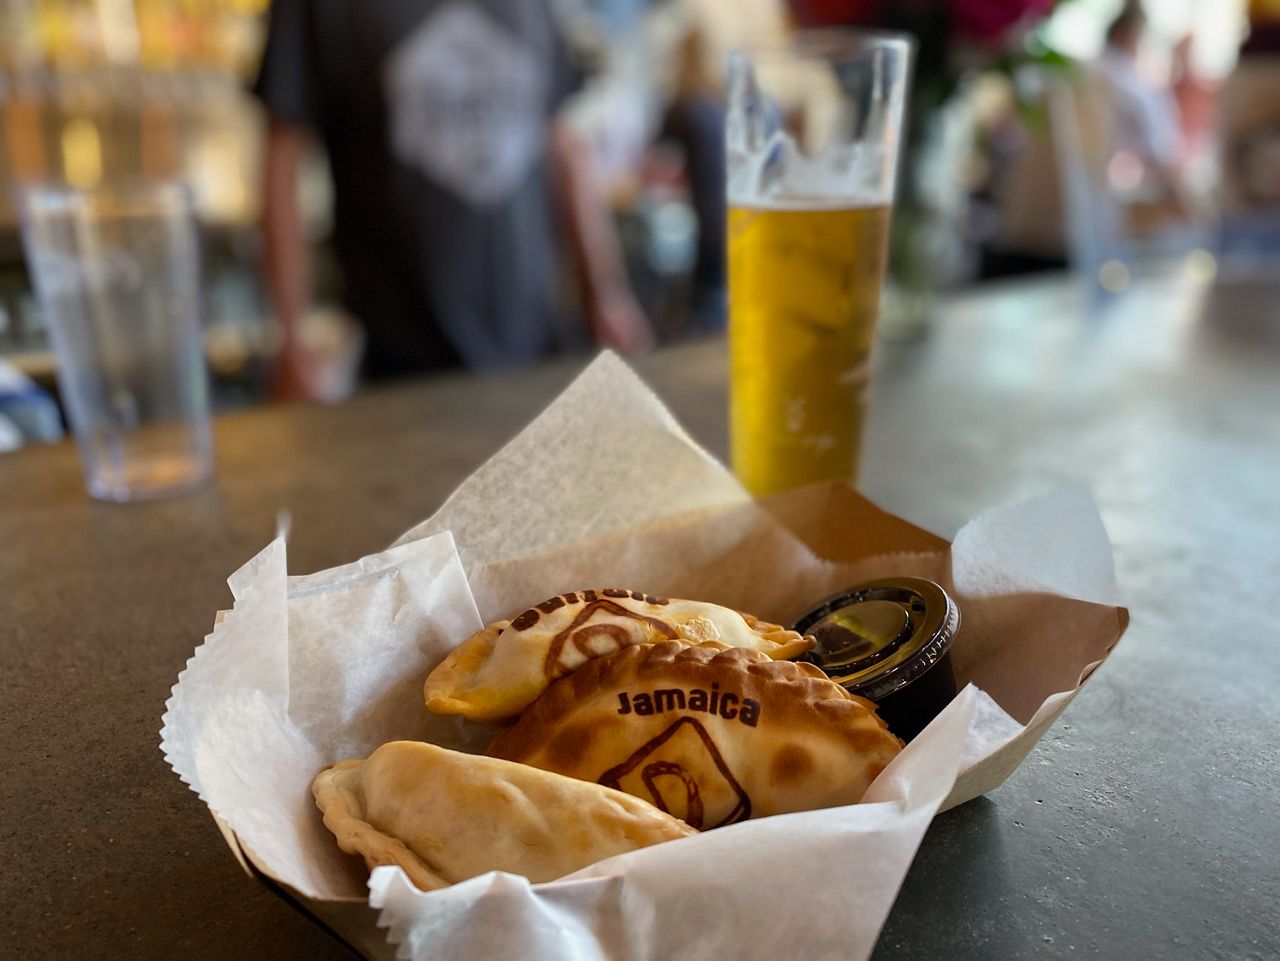 The Empanada's Box serves food at Braxton Brewing Co.'s taproom in Covington. The Empanada's Box has a brick-and-mortar store nearby. (Casey Weldon/Spectrum News 1)